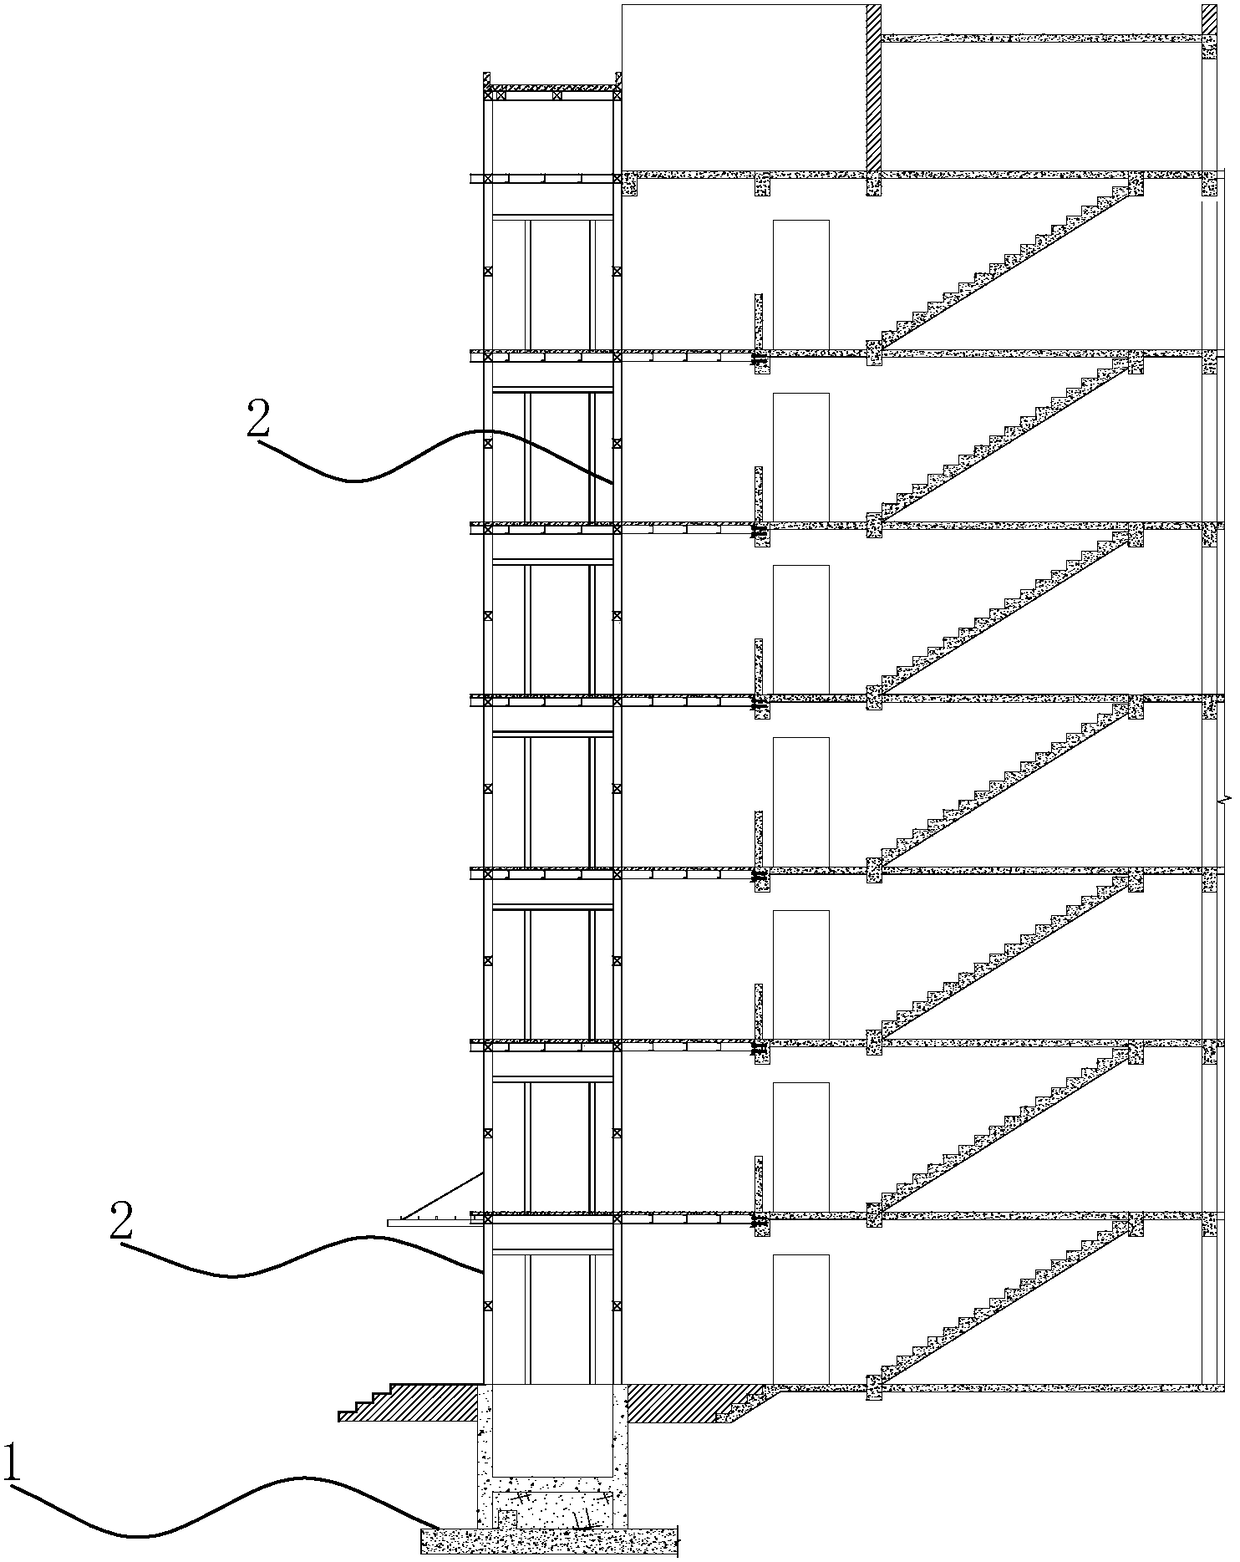 Construction method for additionally arranging of elevators to existing multi-storey residence